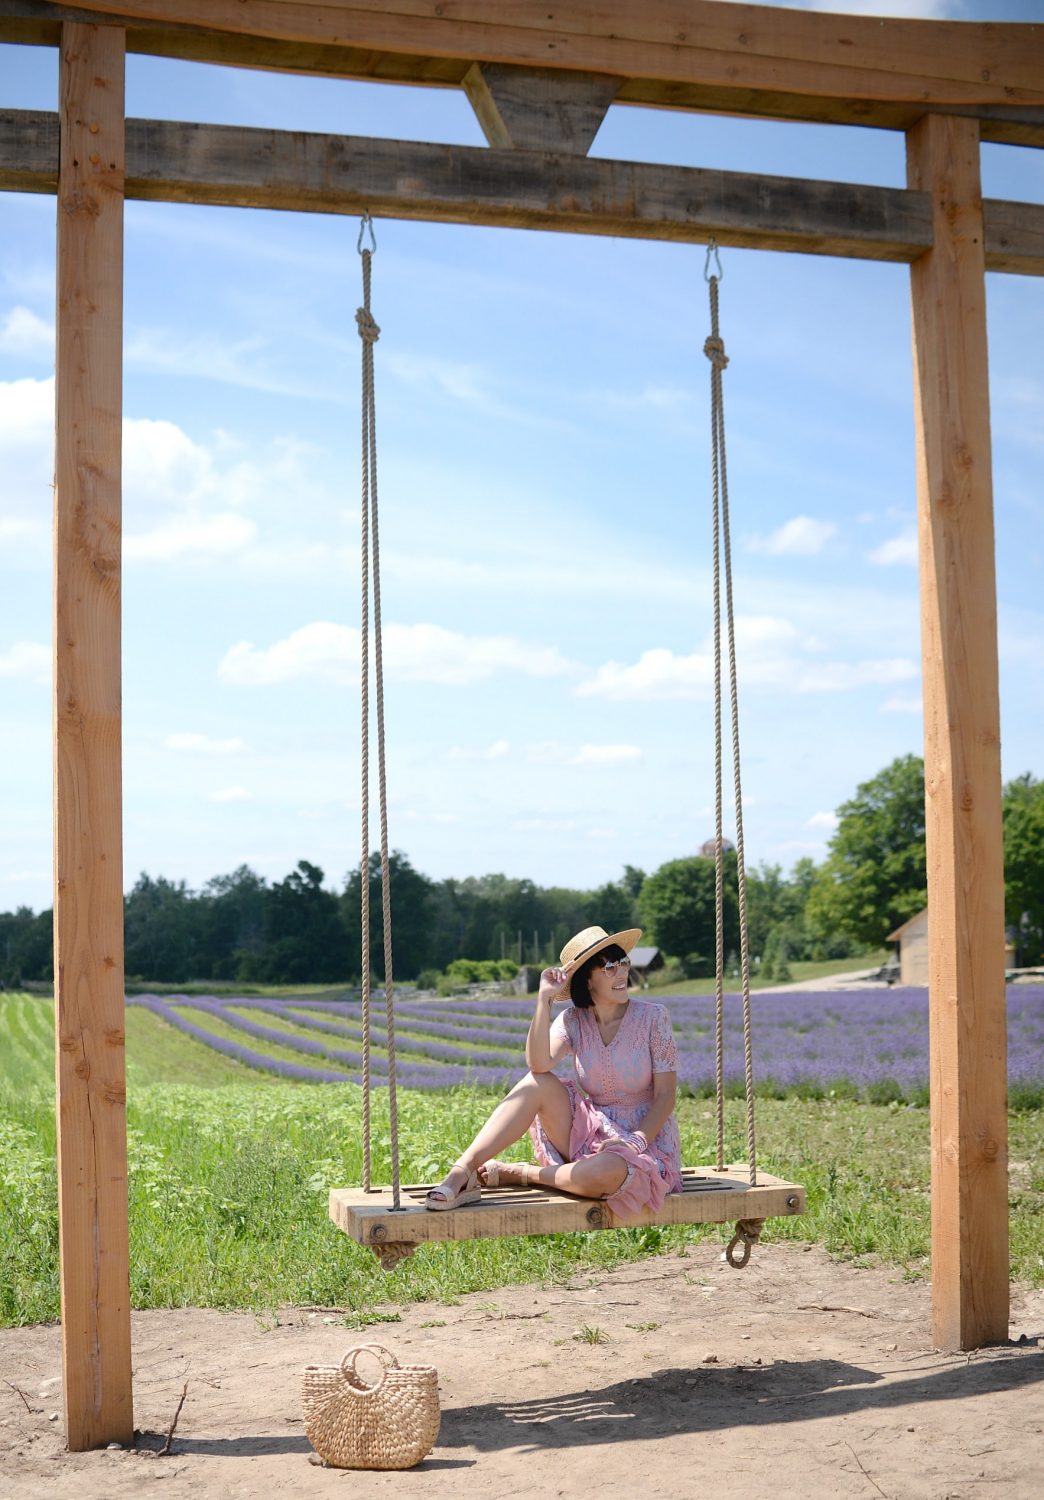 Why You Need To Visit A Lavender Field This Summer